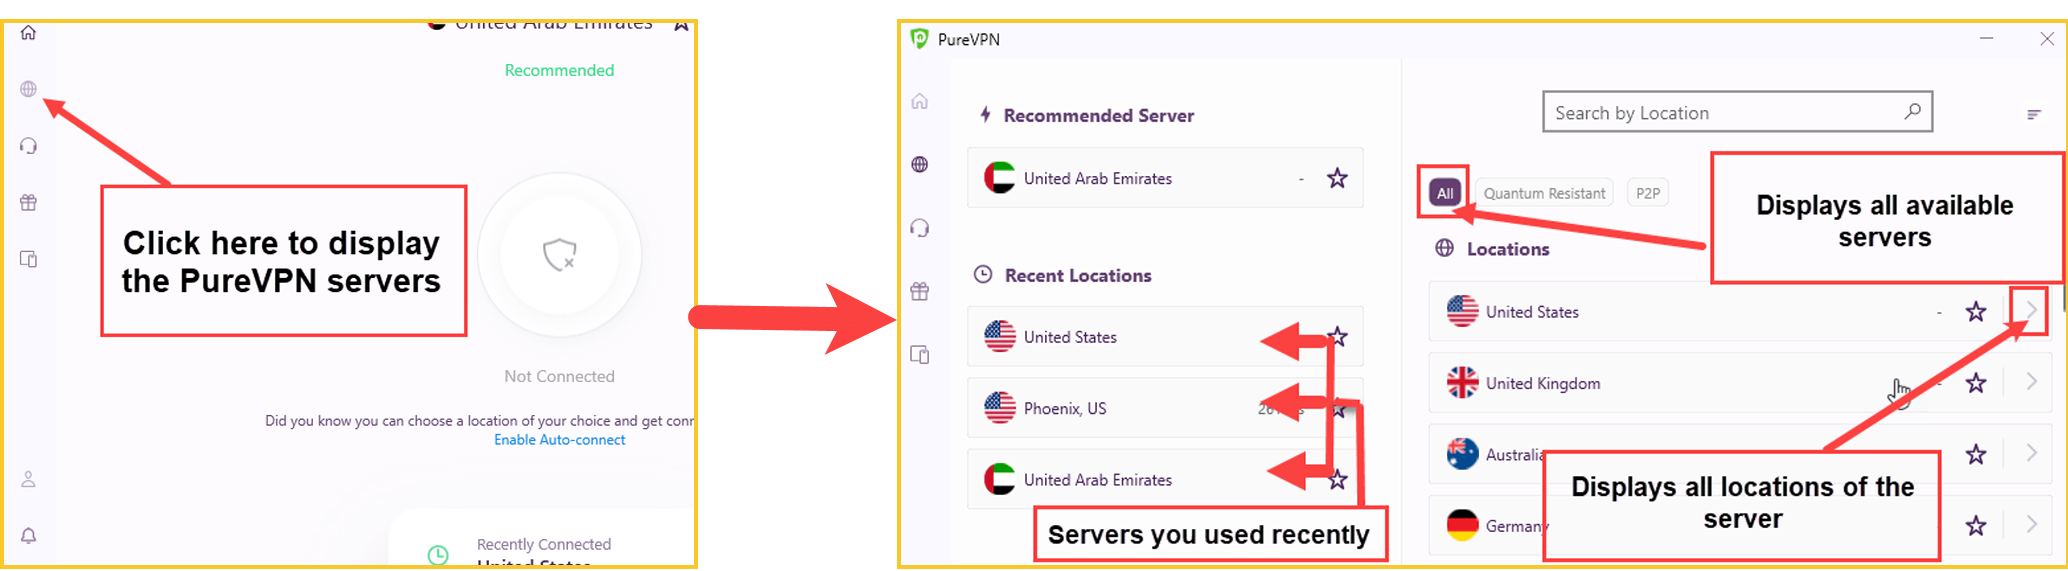 purevpn-server-locations-interface-in-USA